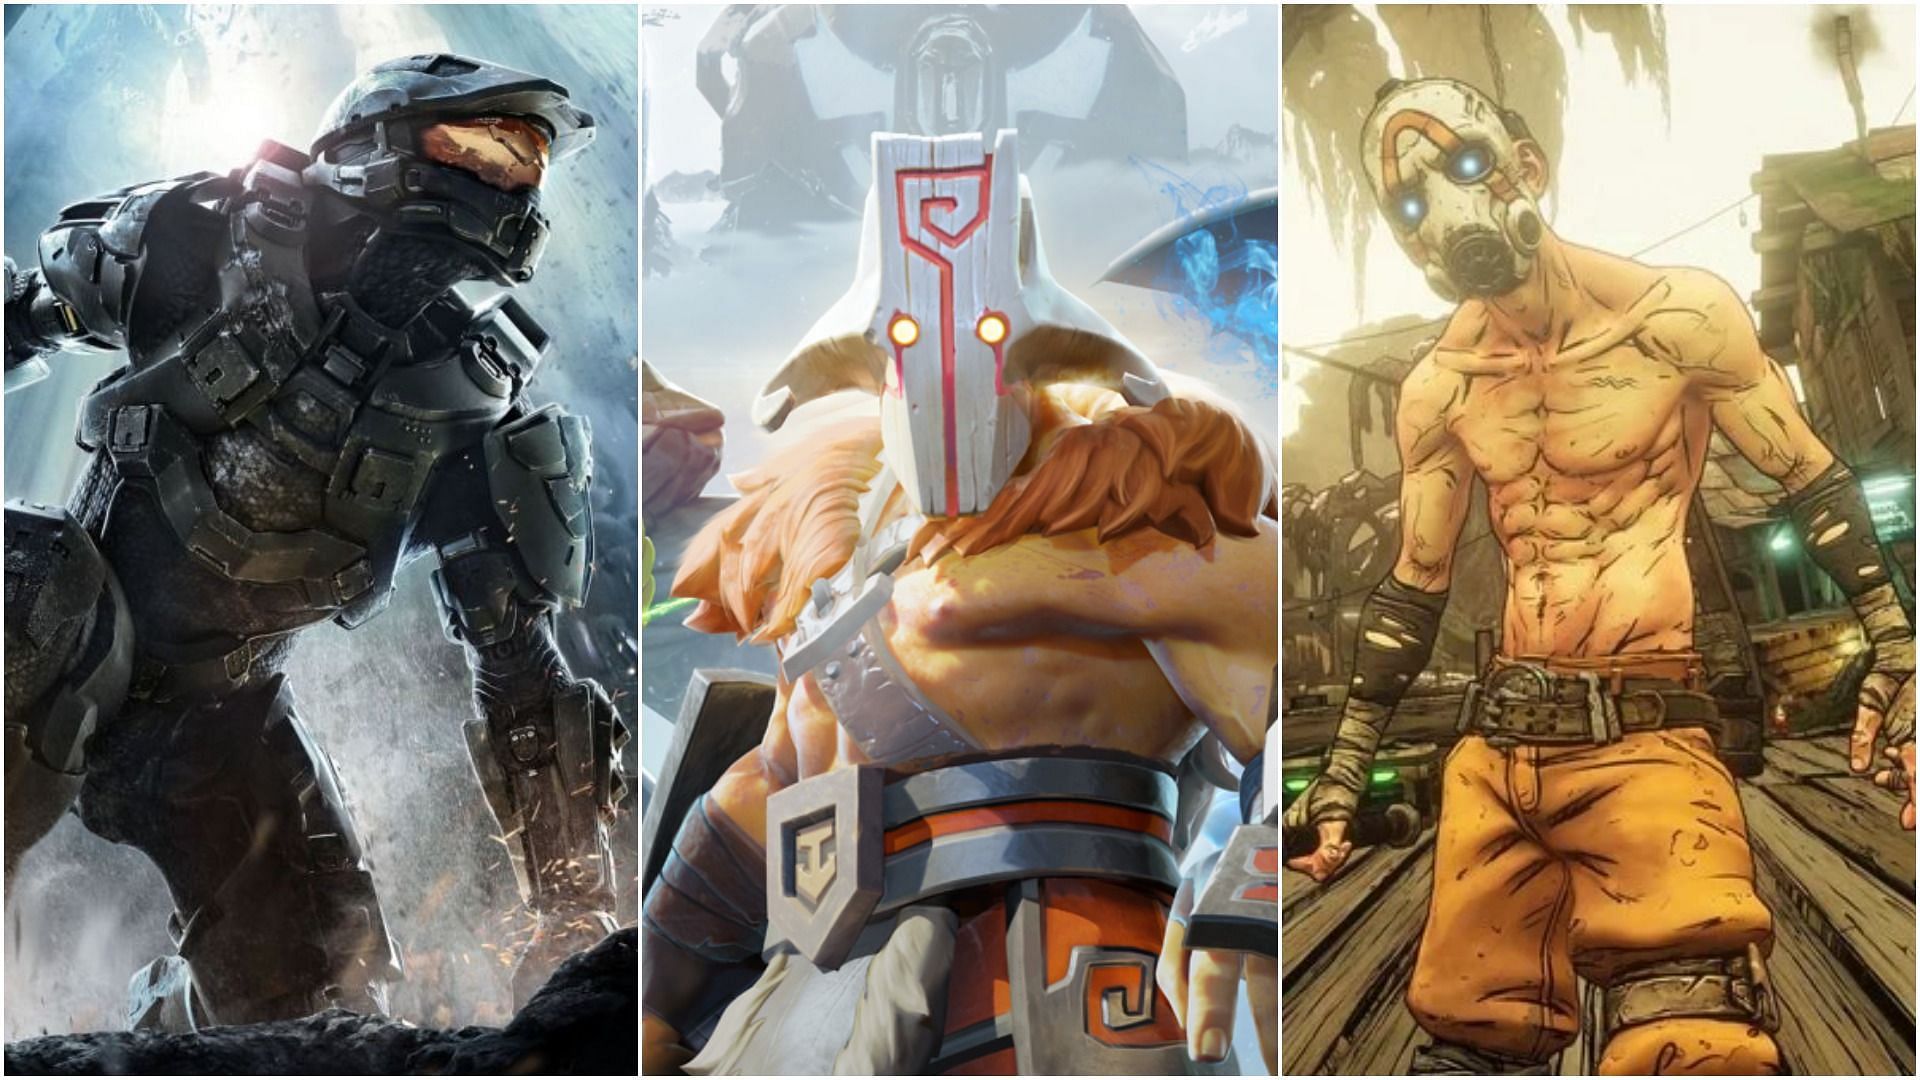 Video game franchises that should look to enter the mobile market (Images via 343 Industries, Valve, Gearbox)